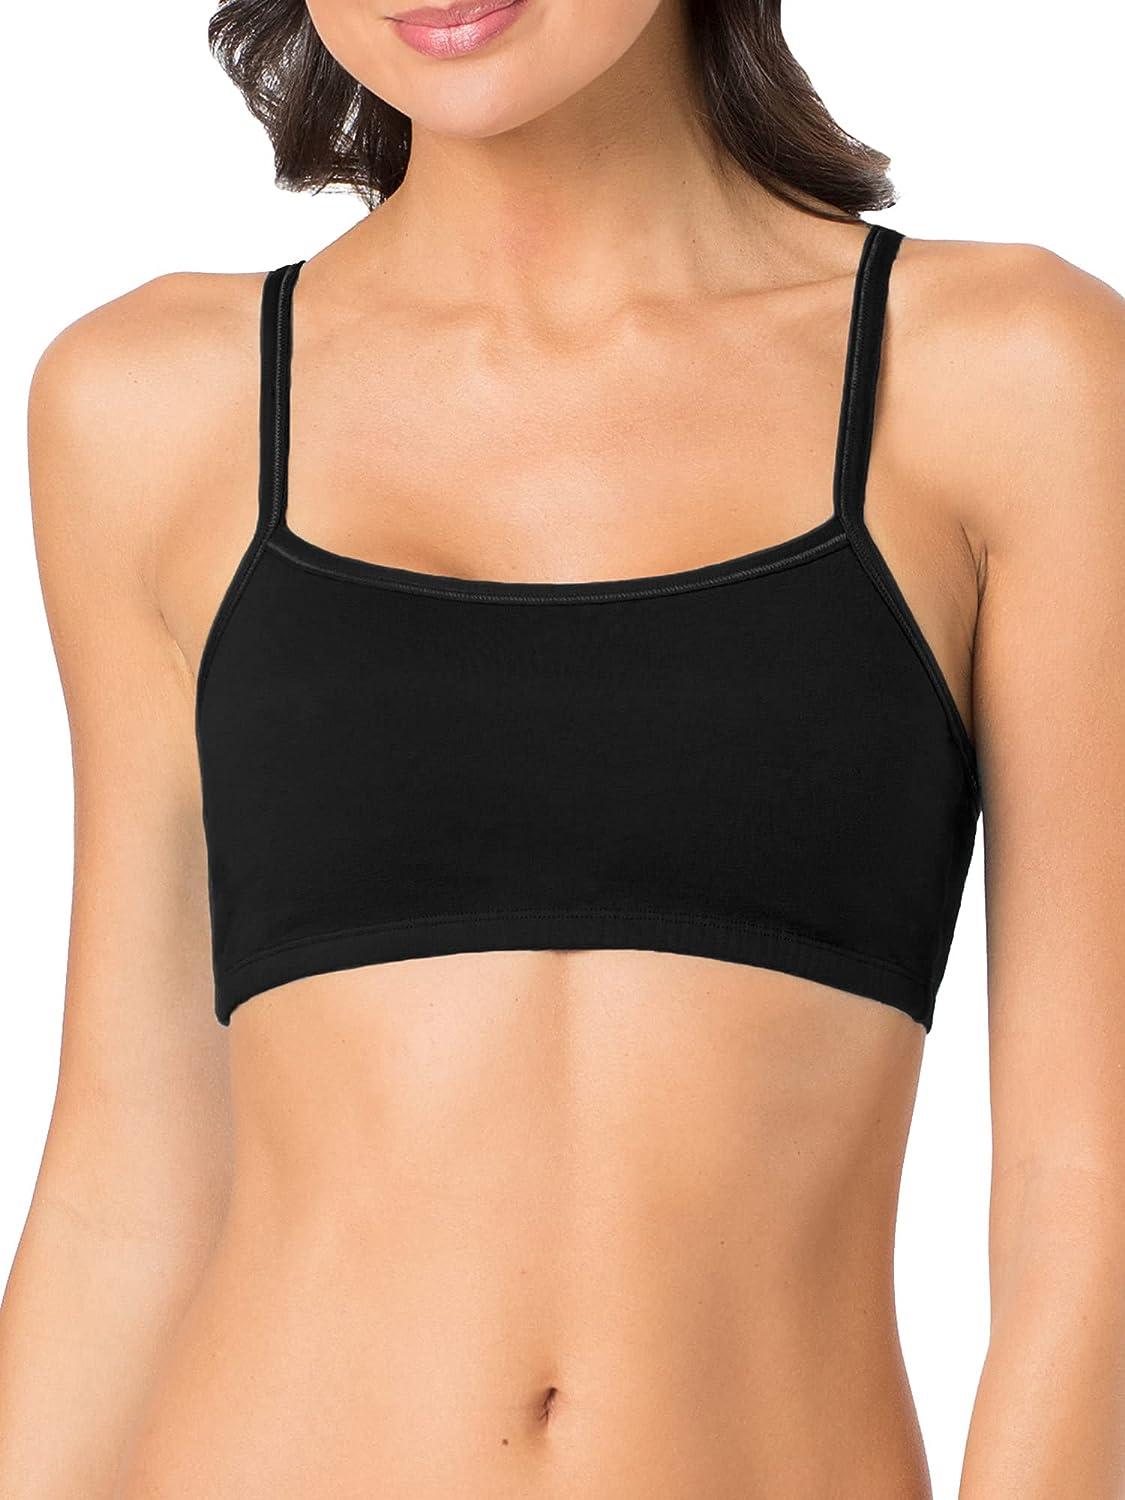 Fruit of the Loom, Built up Sports Bra Size 36 Black